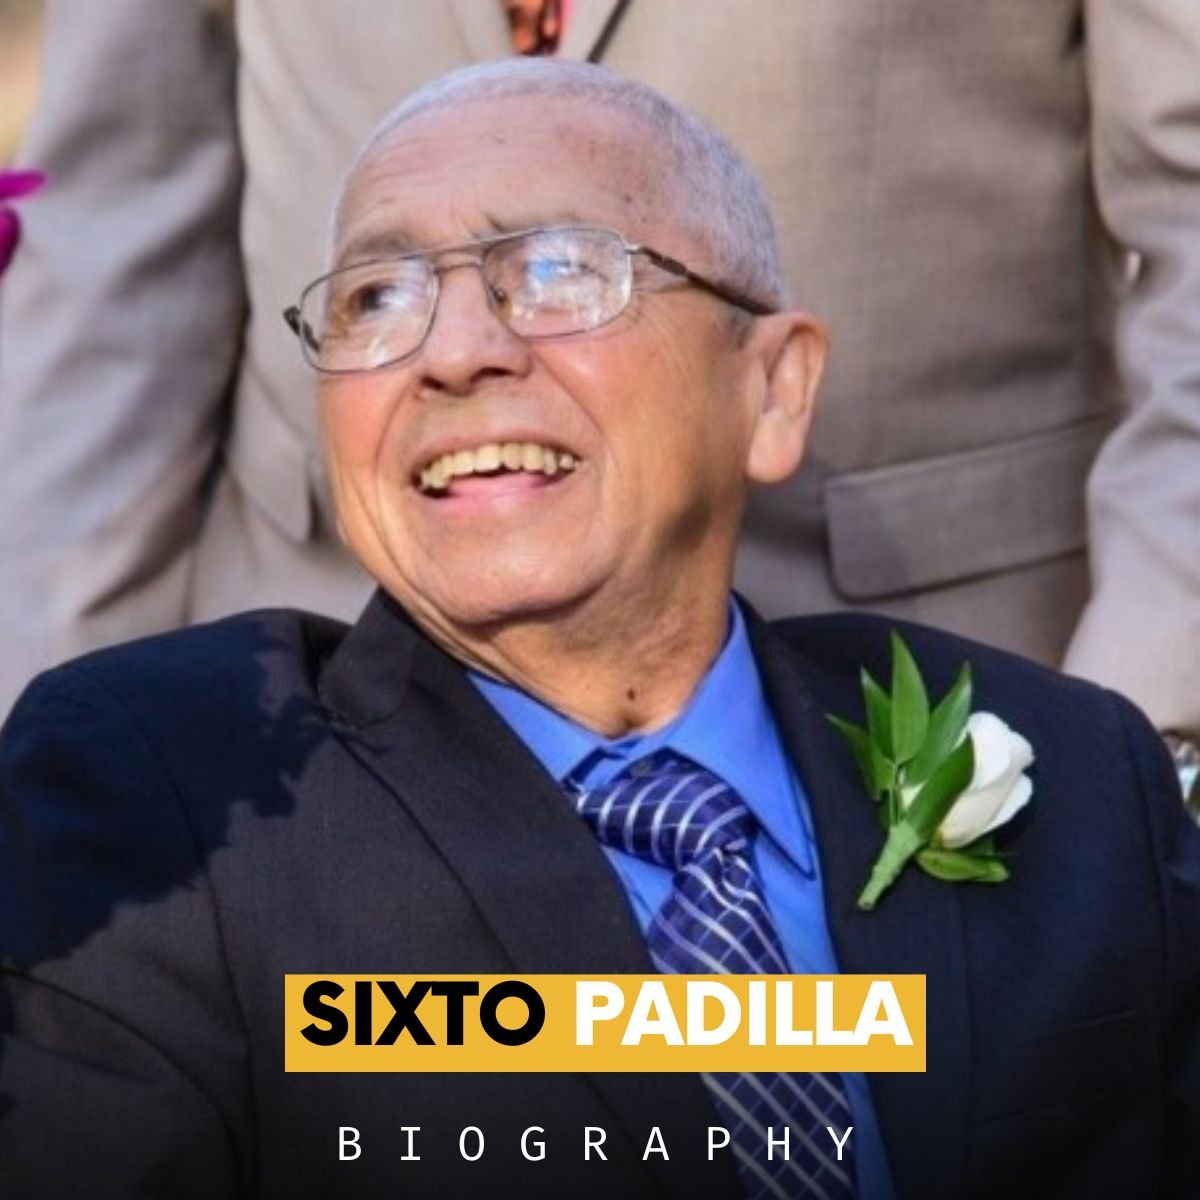 Who Is Sixto Padilla? – An Insider To His Obituary, Death, Grave, Bio, And More